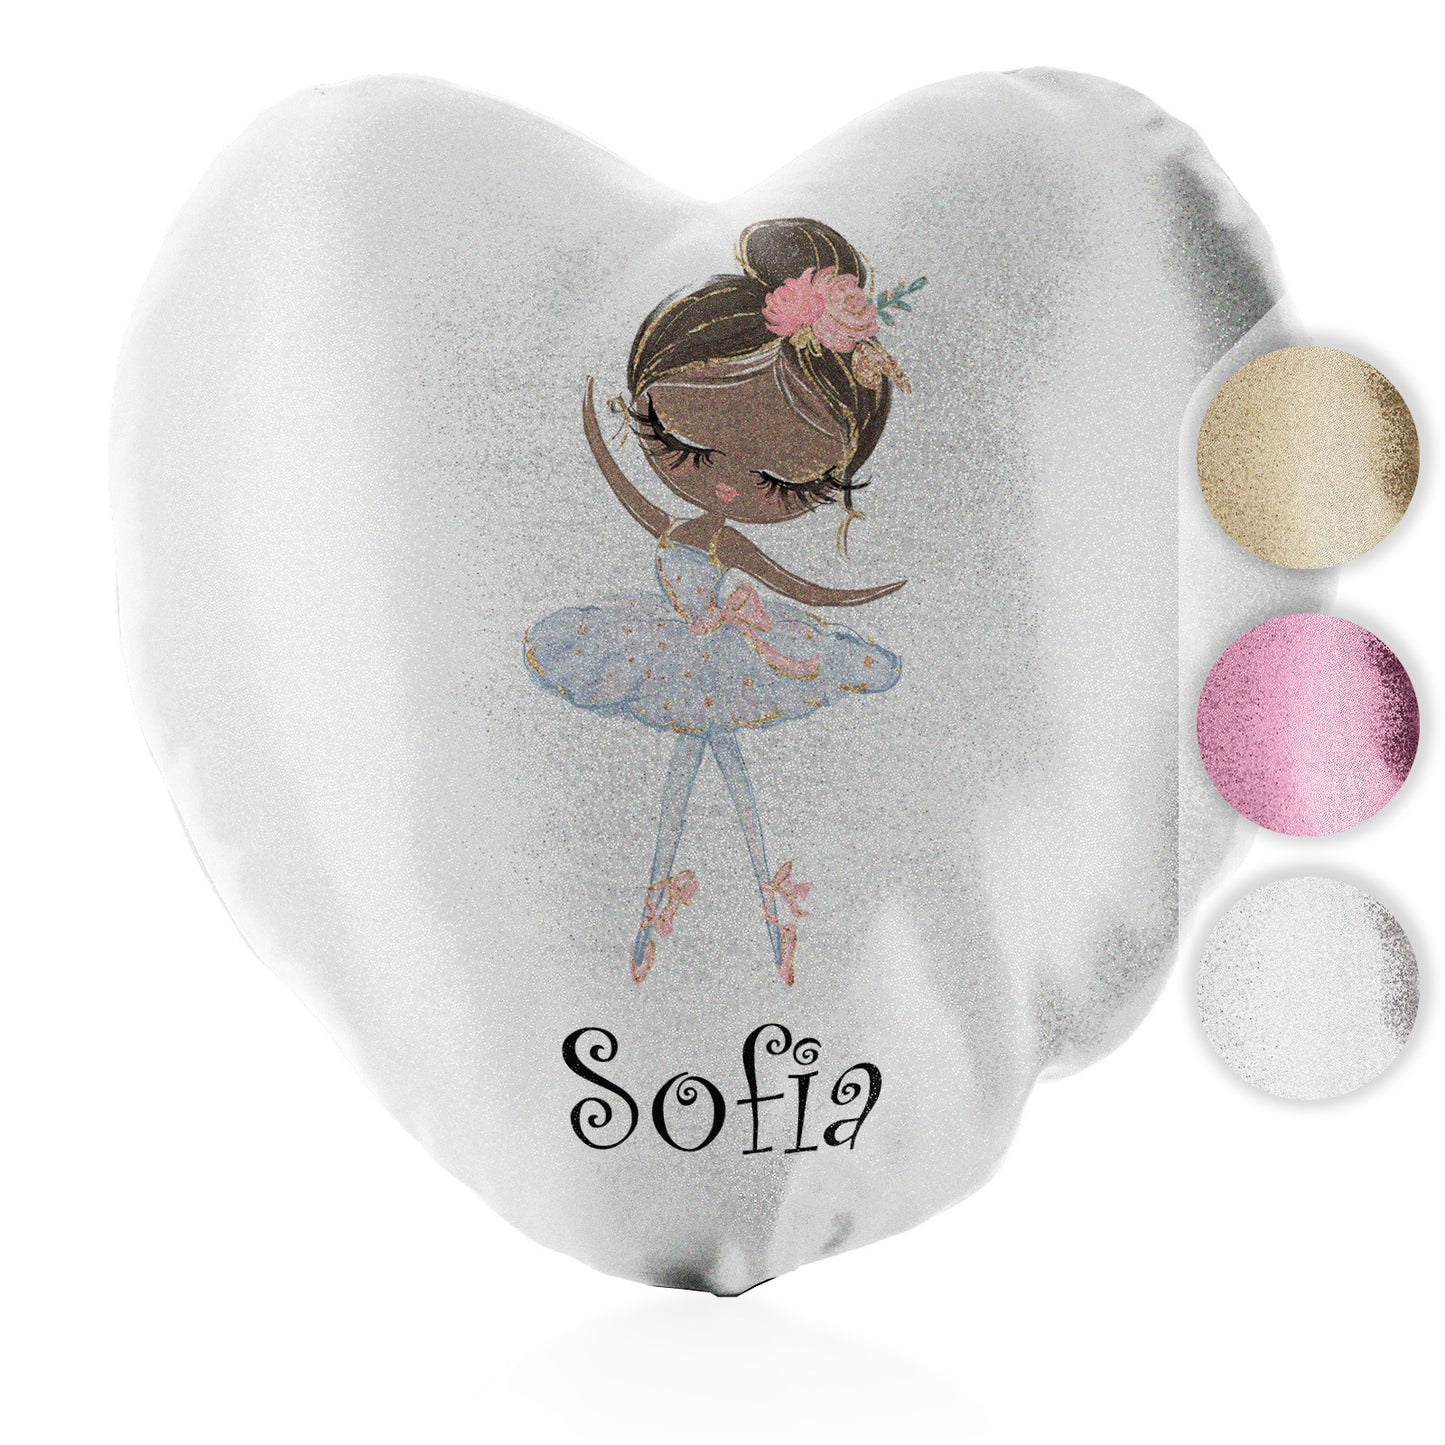 Personalised Glitter Heart Cushion with Cute Text and Black Hair White Dress Ballerina